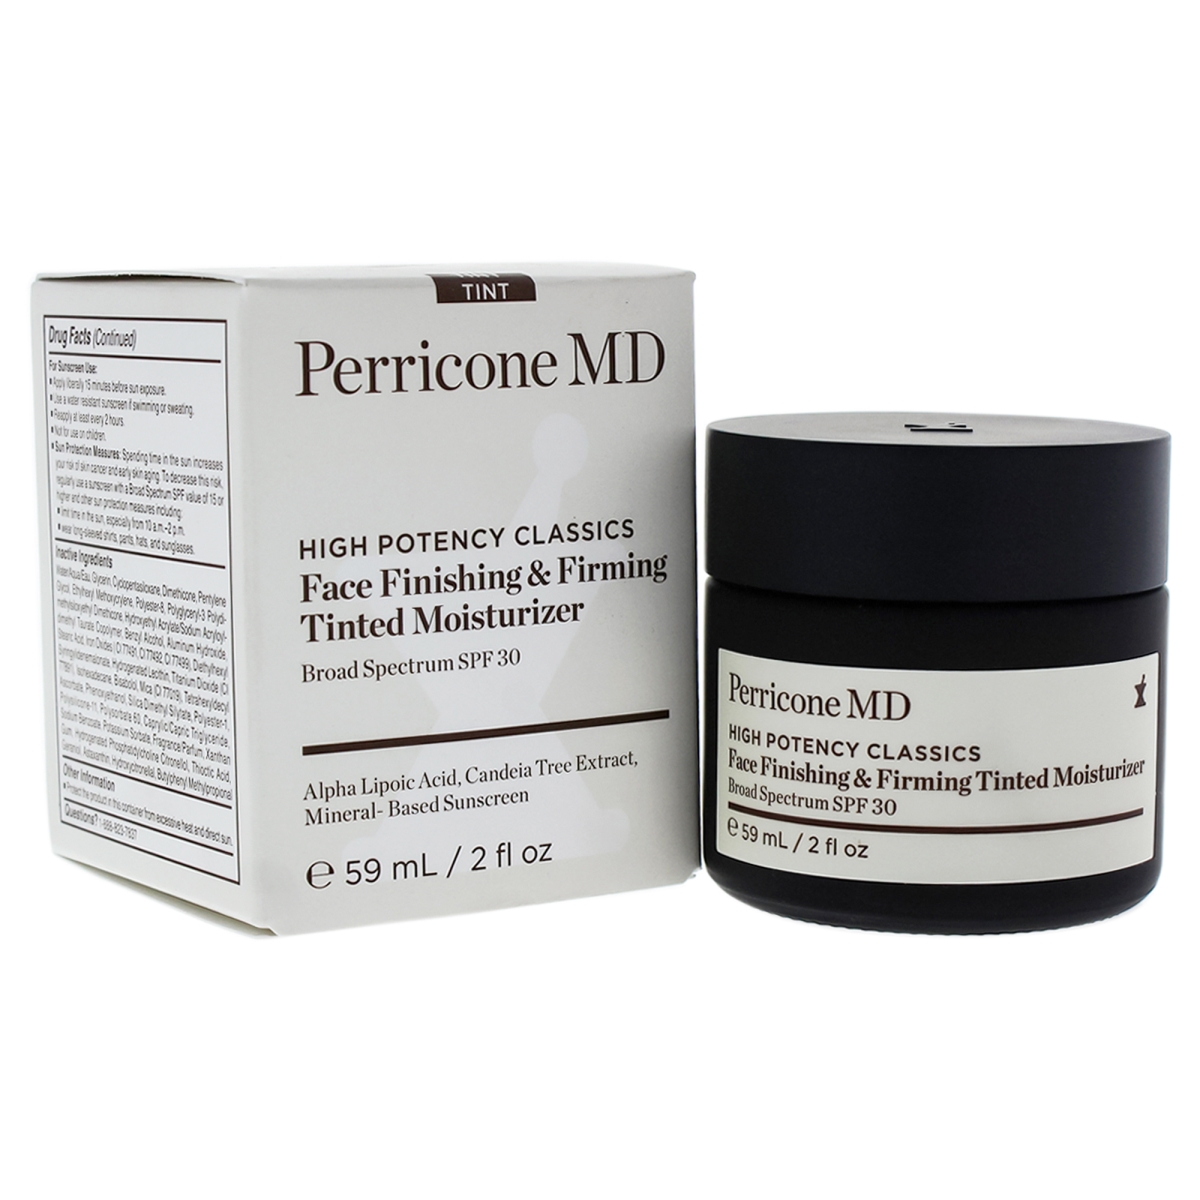 I0087941 High Potency Classics Face Finishing & Firming Tinted Moisturizer SPF 30 for Unisex - 2 oz -  Perricone Md